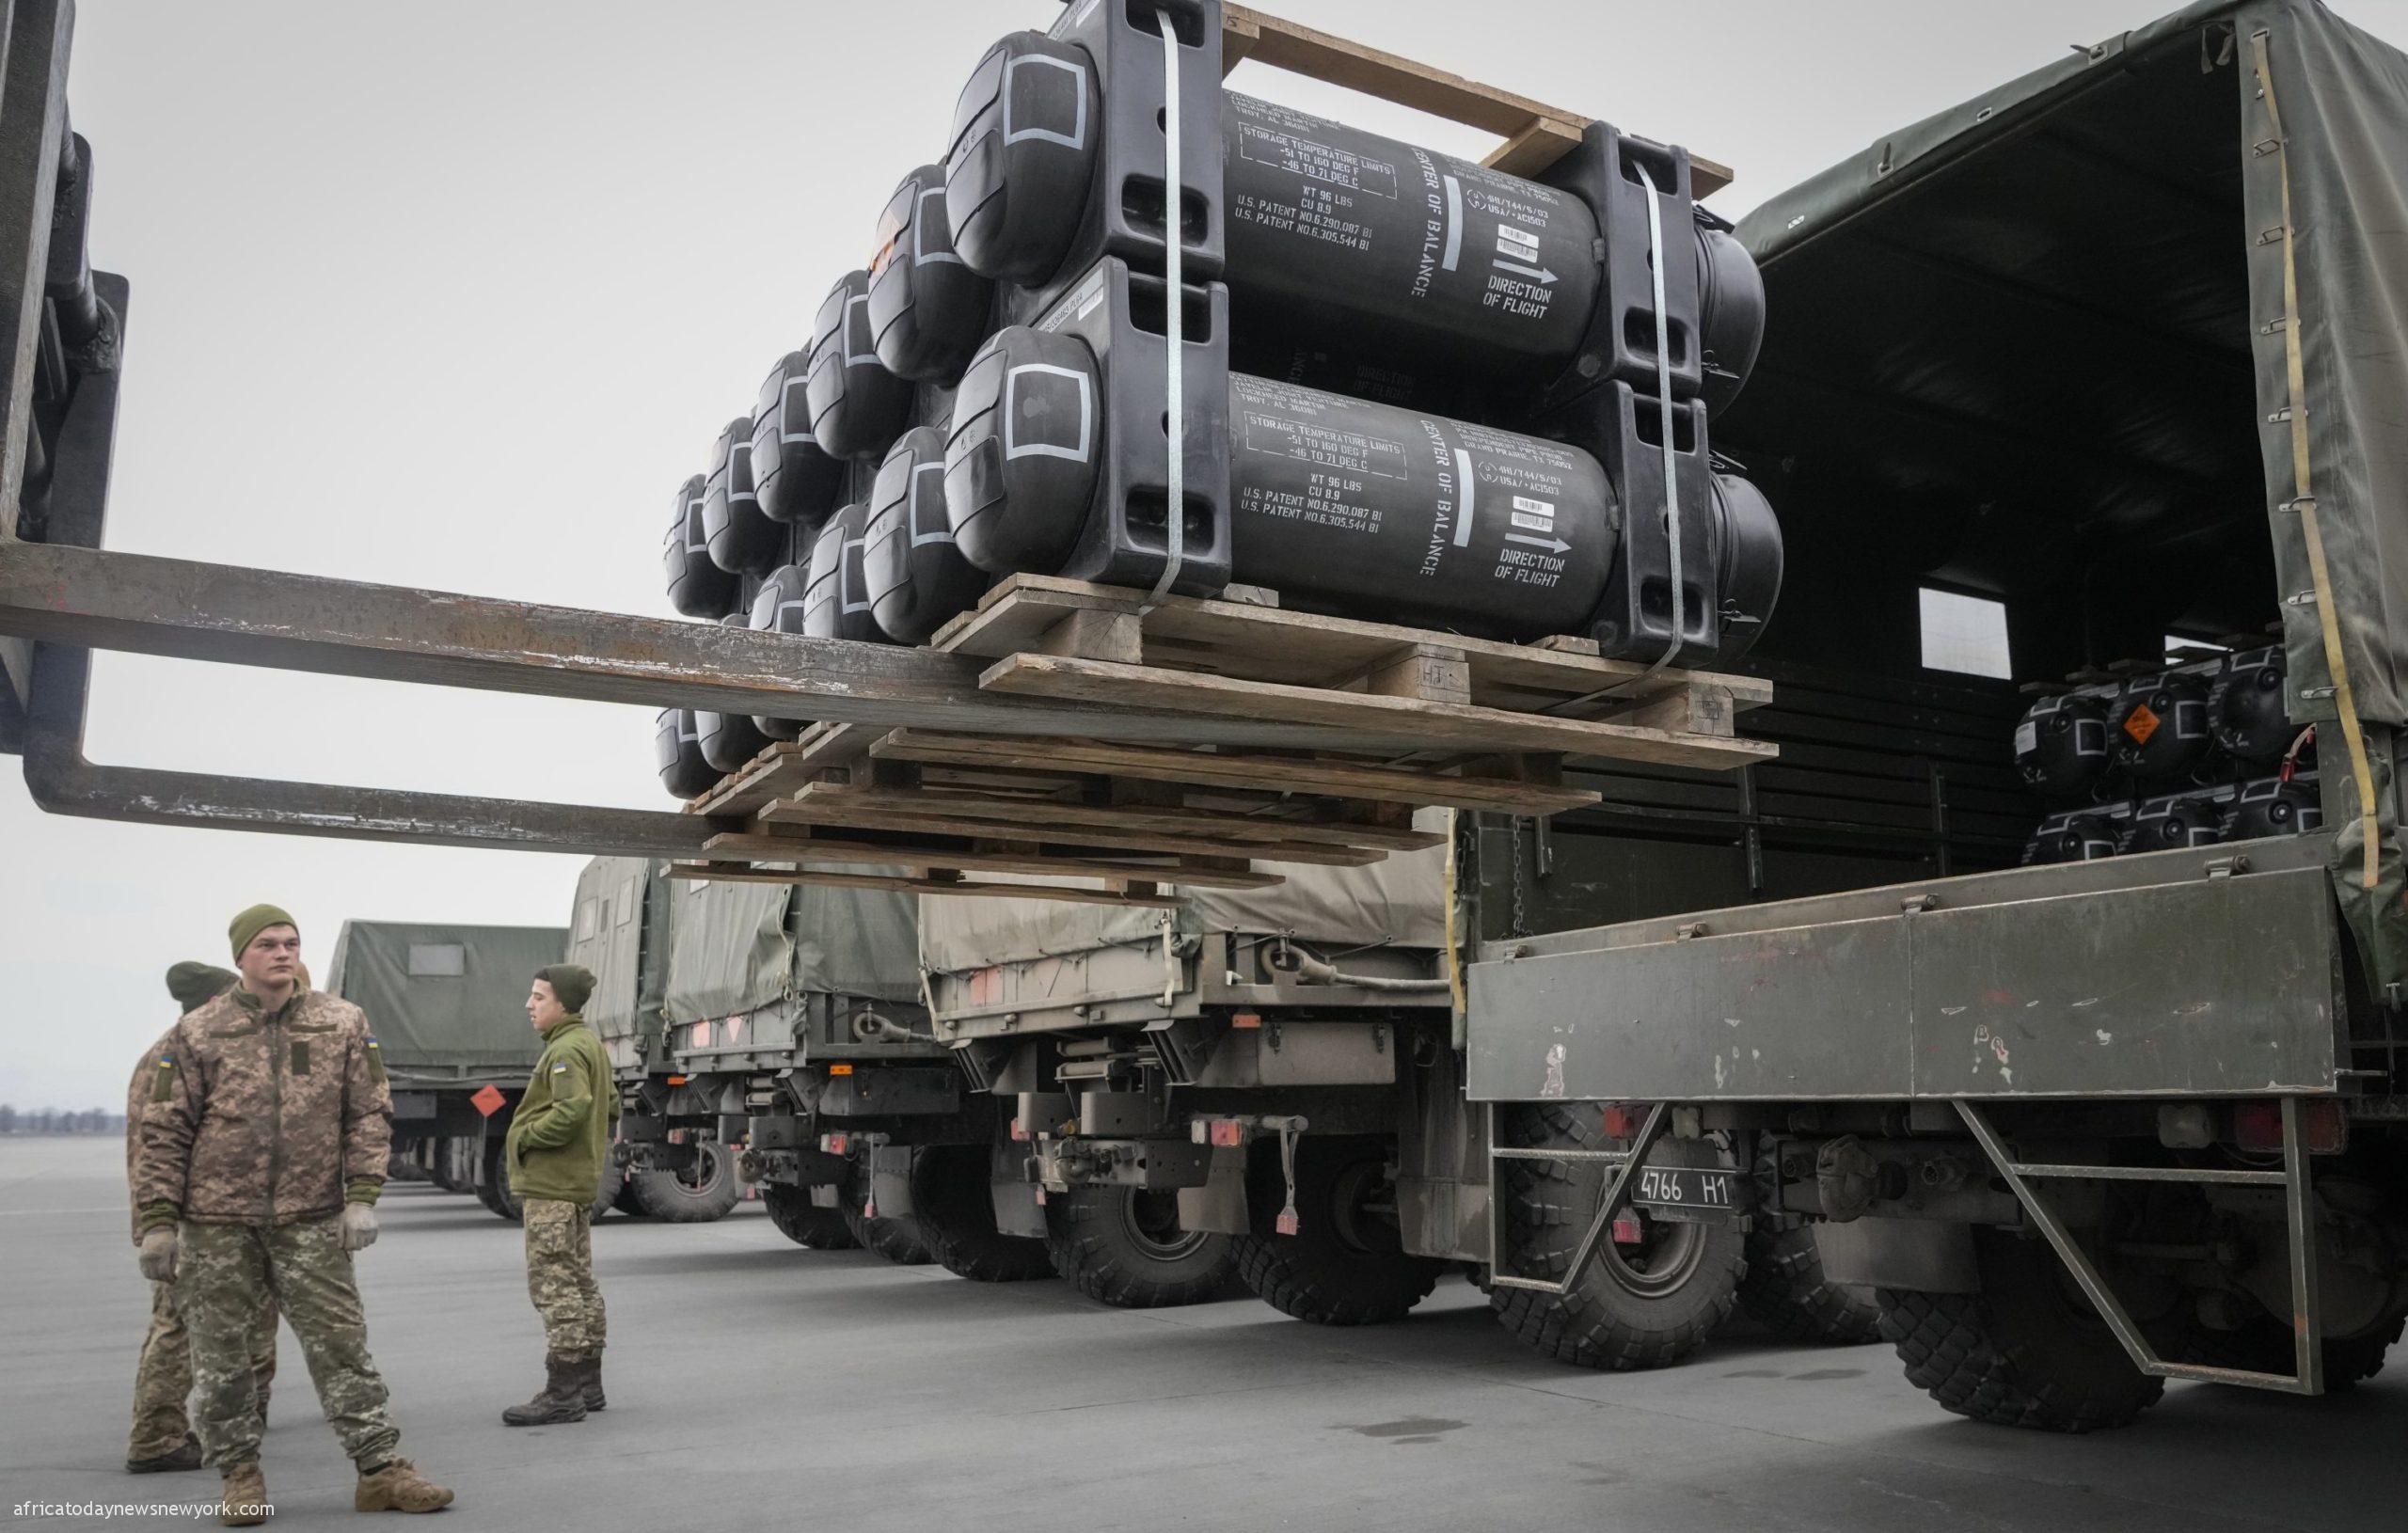 Rocket US Fueling Our War With Ukraine With Rocket Supplies - Russia